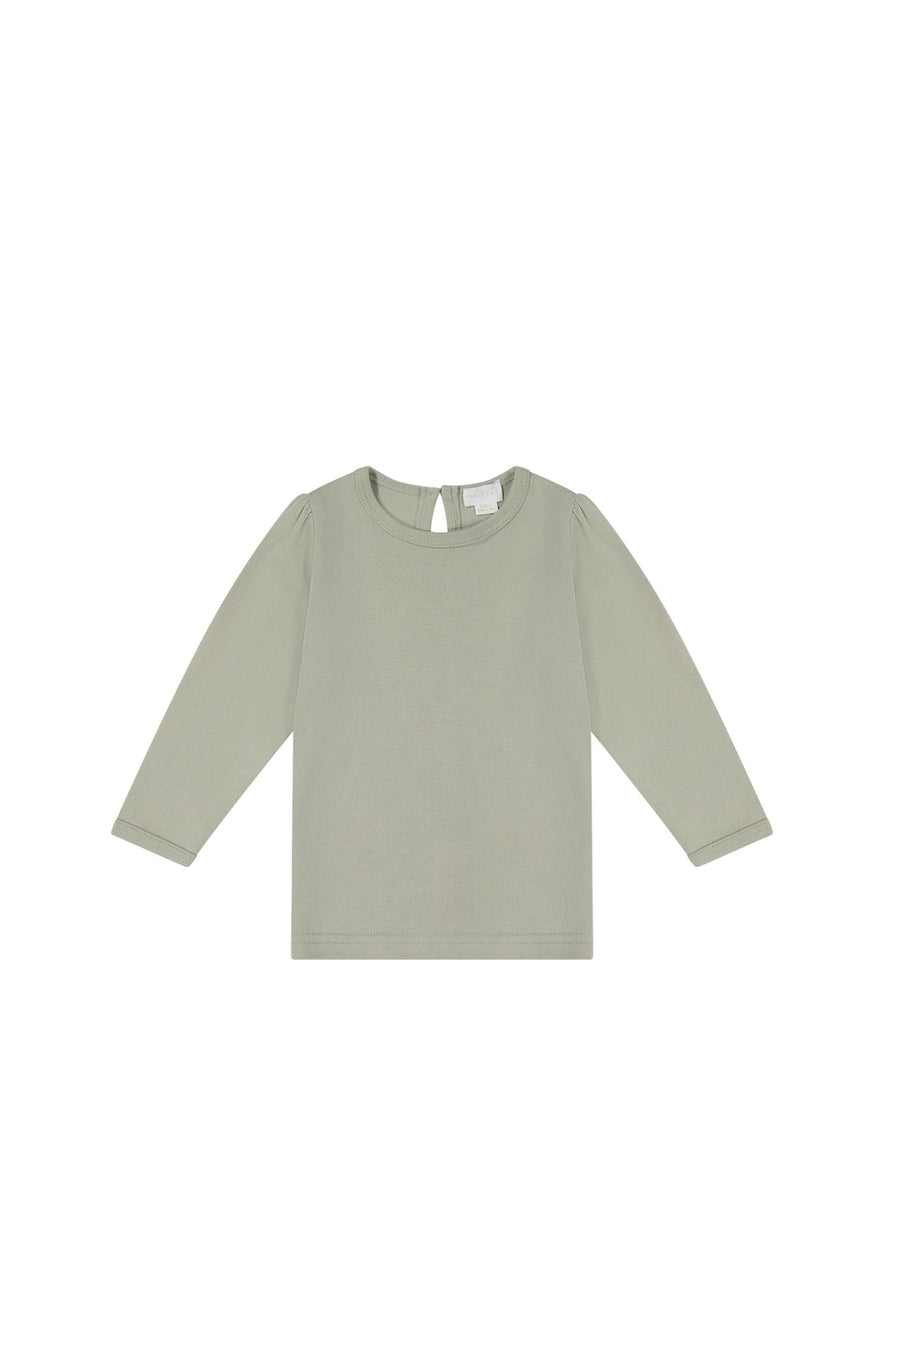 Pima Cotton Cindy Top - Sage Childrens Top from Jamie Kay USA